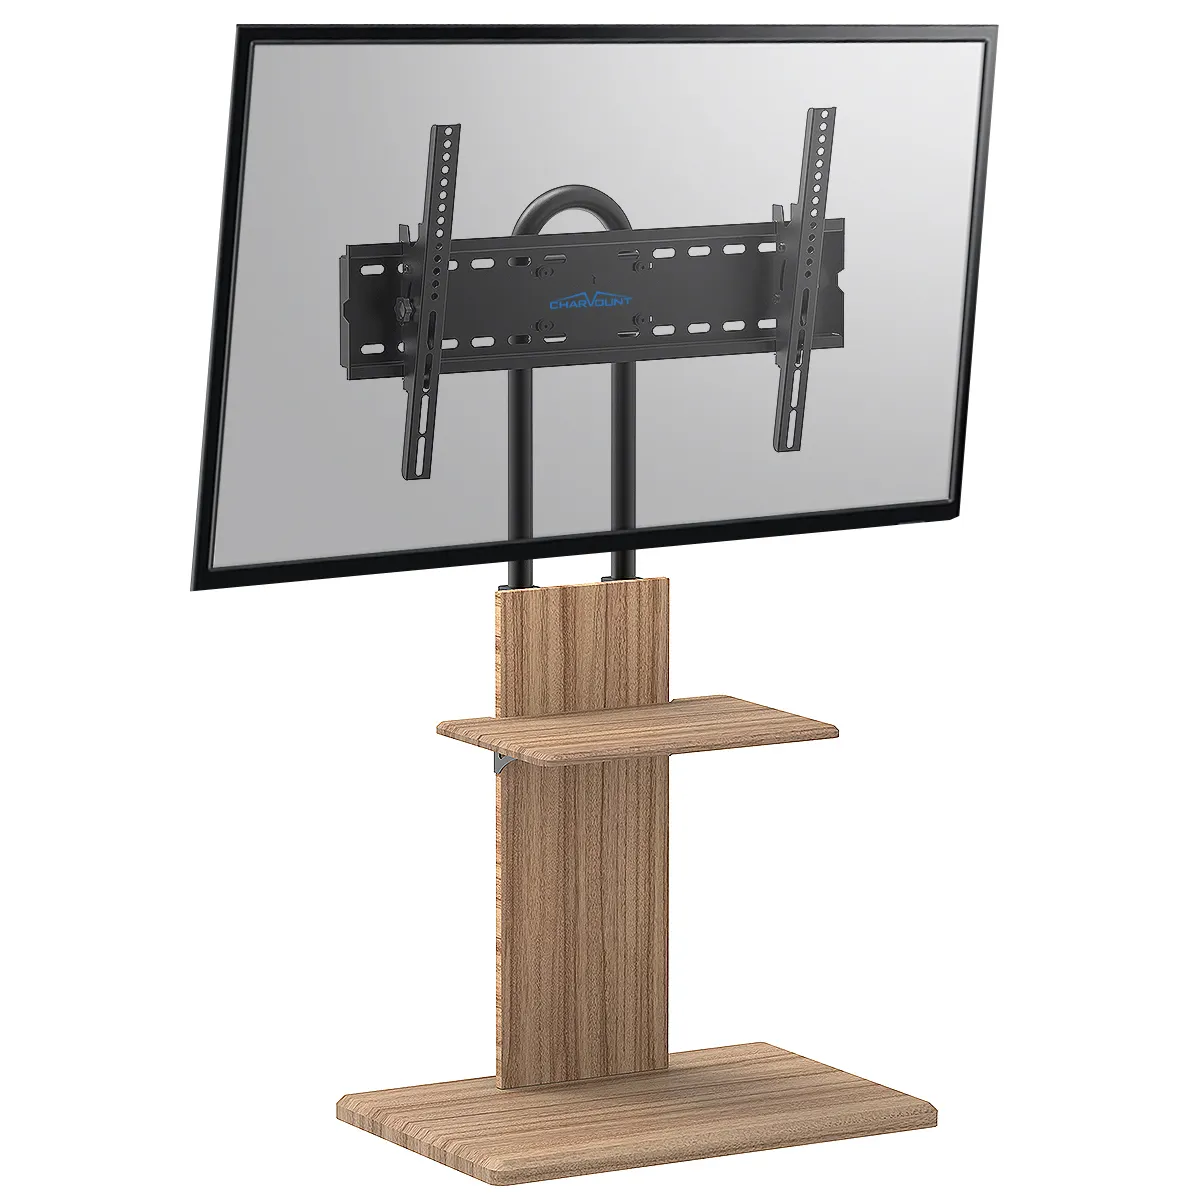 New Arrived Universal Swivel Tilt TV Stand with Wooden Base Height Adjustable Table Top TV Stand Mount Max VESA 400x400mm